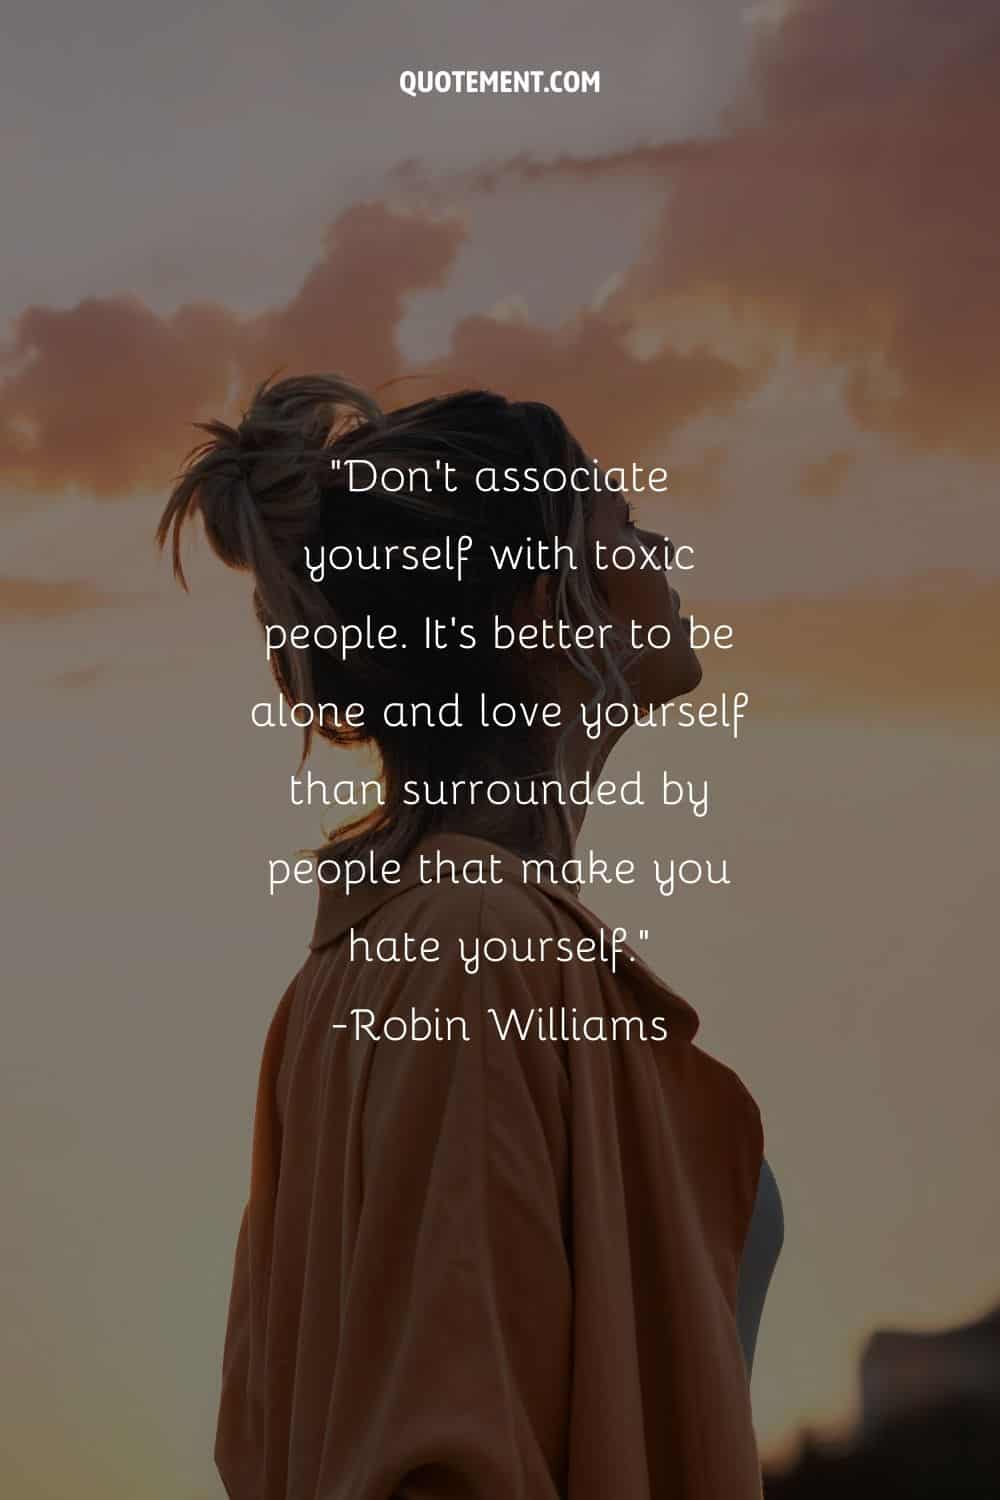 Don’t associate yourself with toxic people